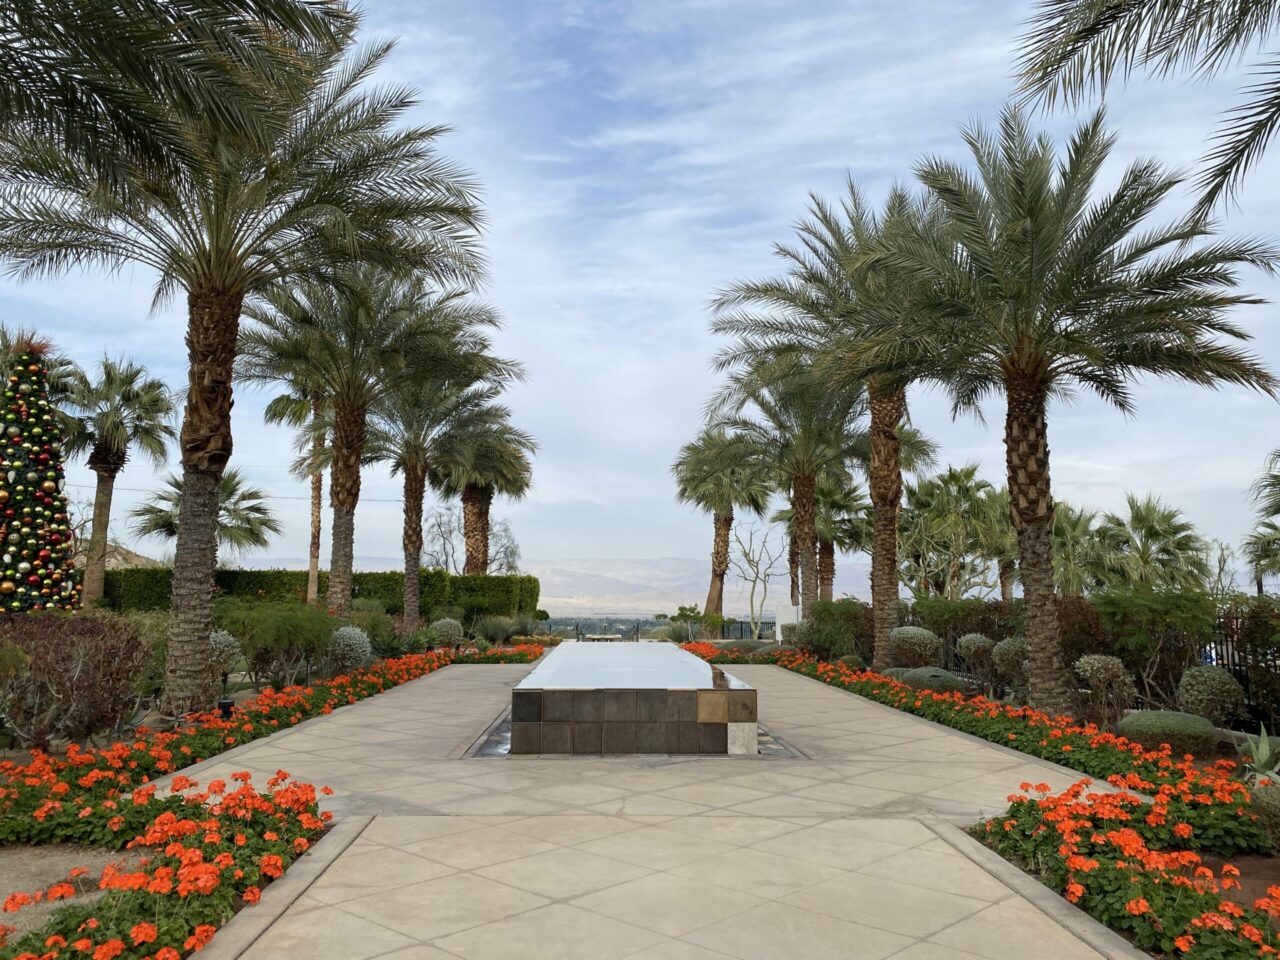 The Ritz Carlton Rancho Mirage hotel vistas and manicured grounds 